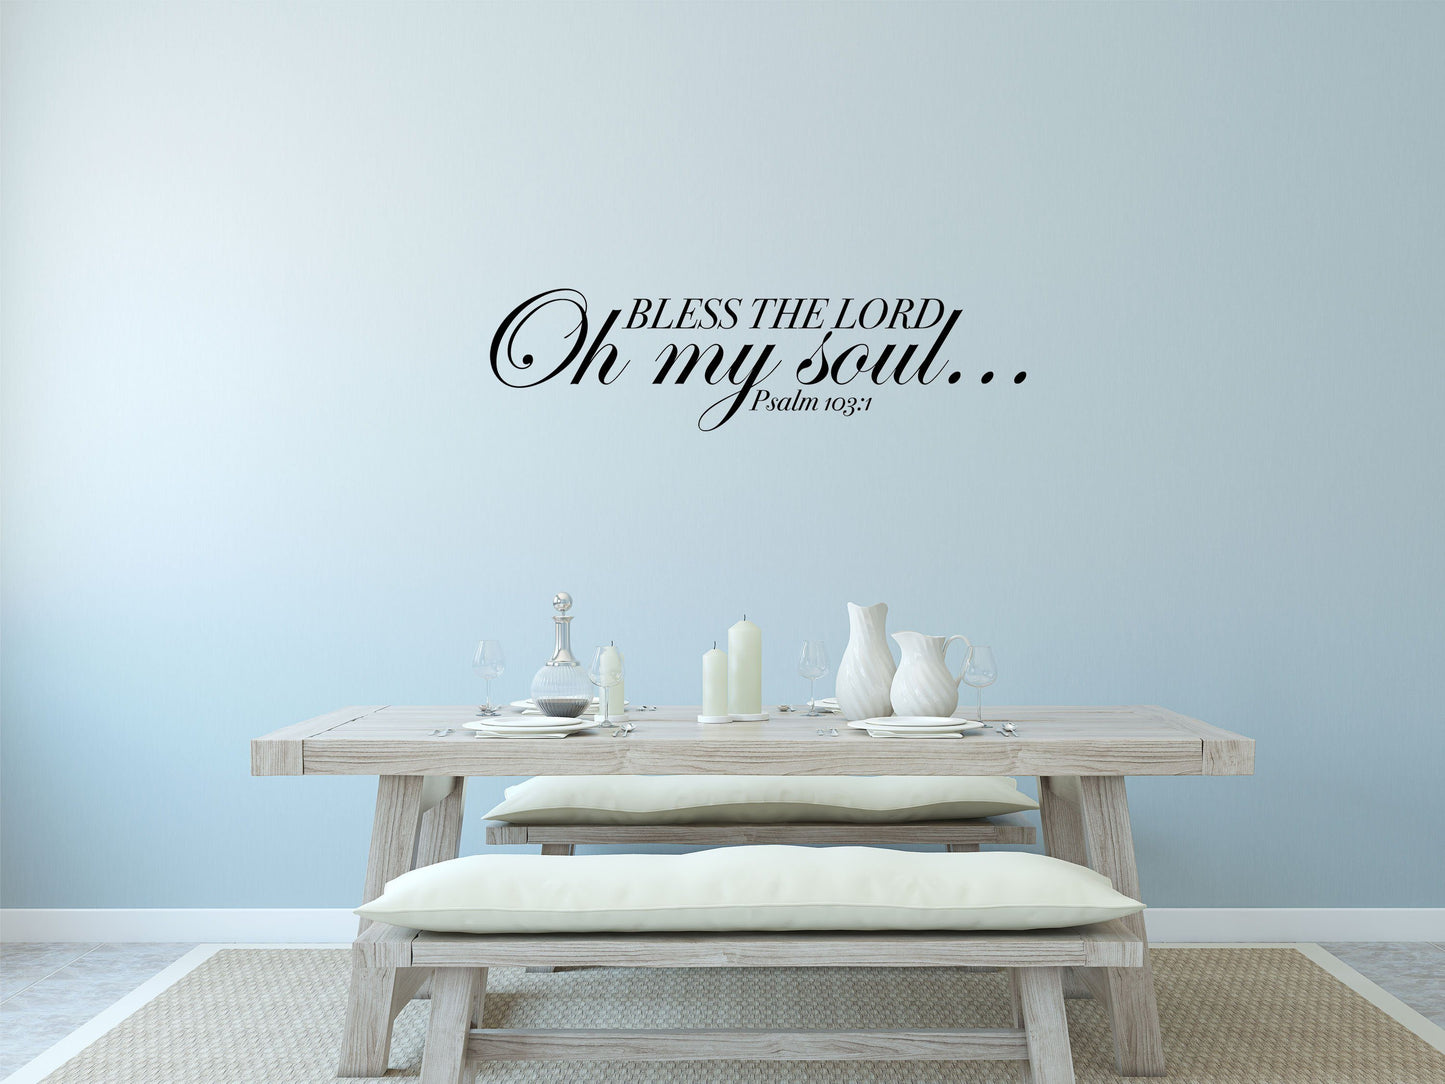 Bless the Lord Oh my Soul Bedroom Wall Decor Sticker Vinyl Wall Decal Inspirational Wall Signs 